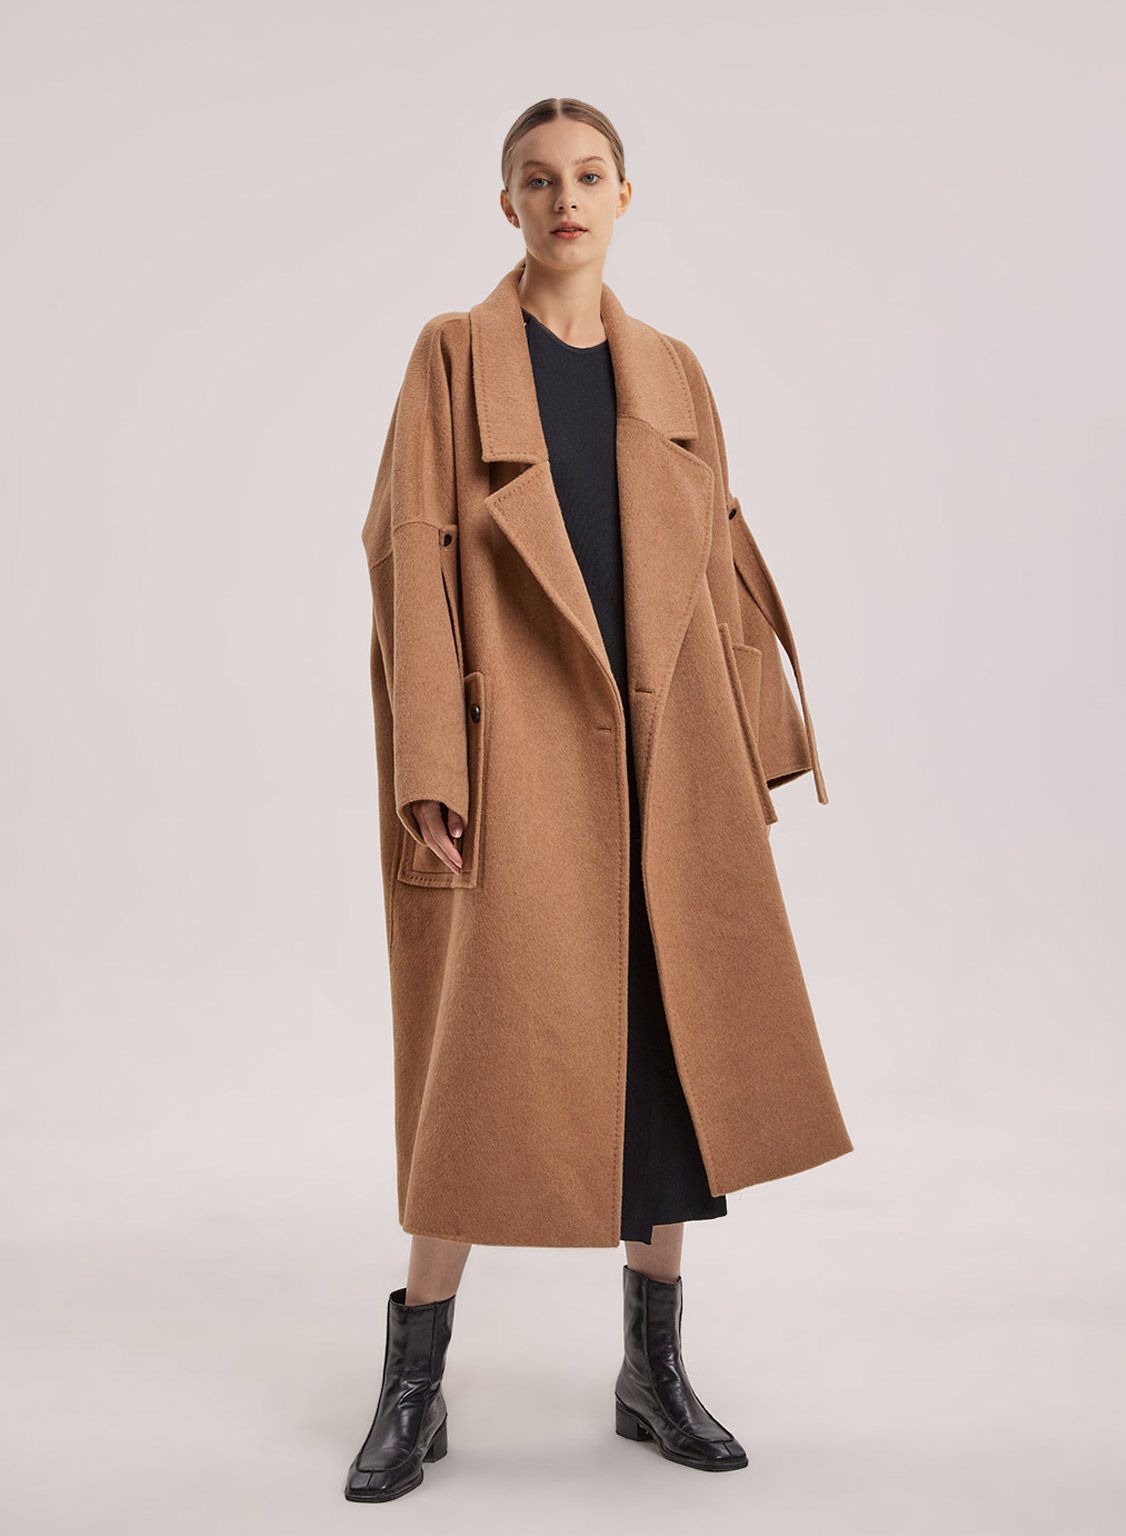 This coat design has a delicate balance between classic and modern styles. This coat is made from... | Gentle Herd